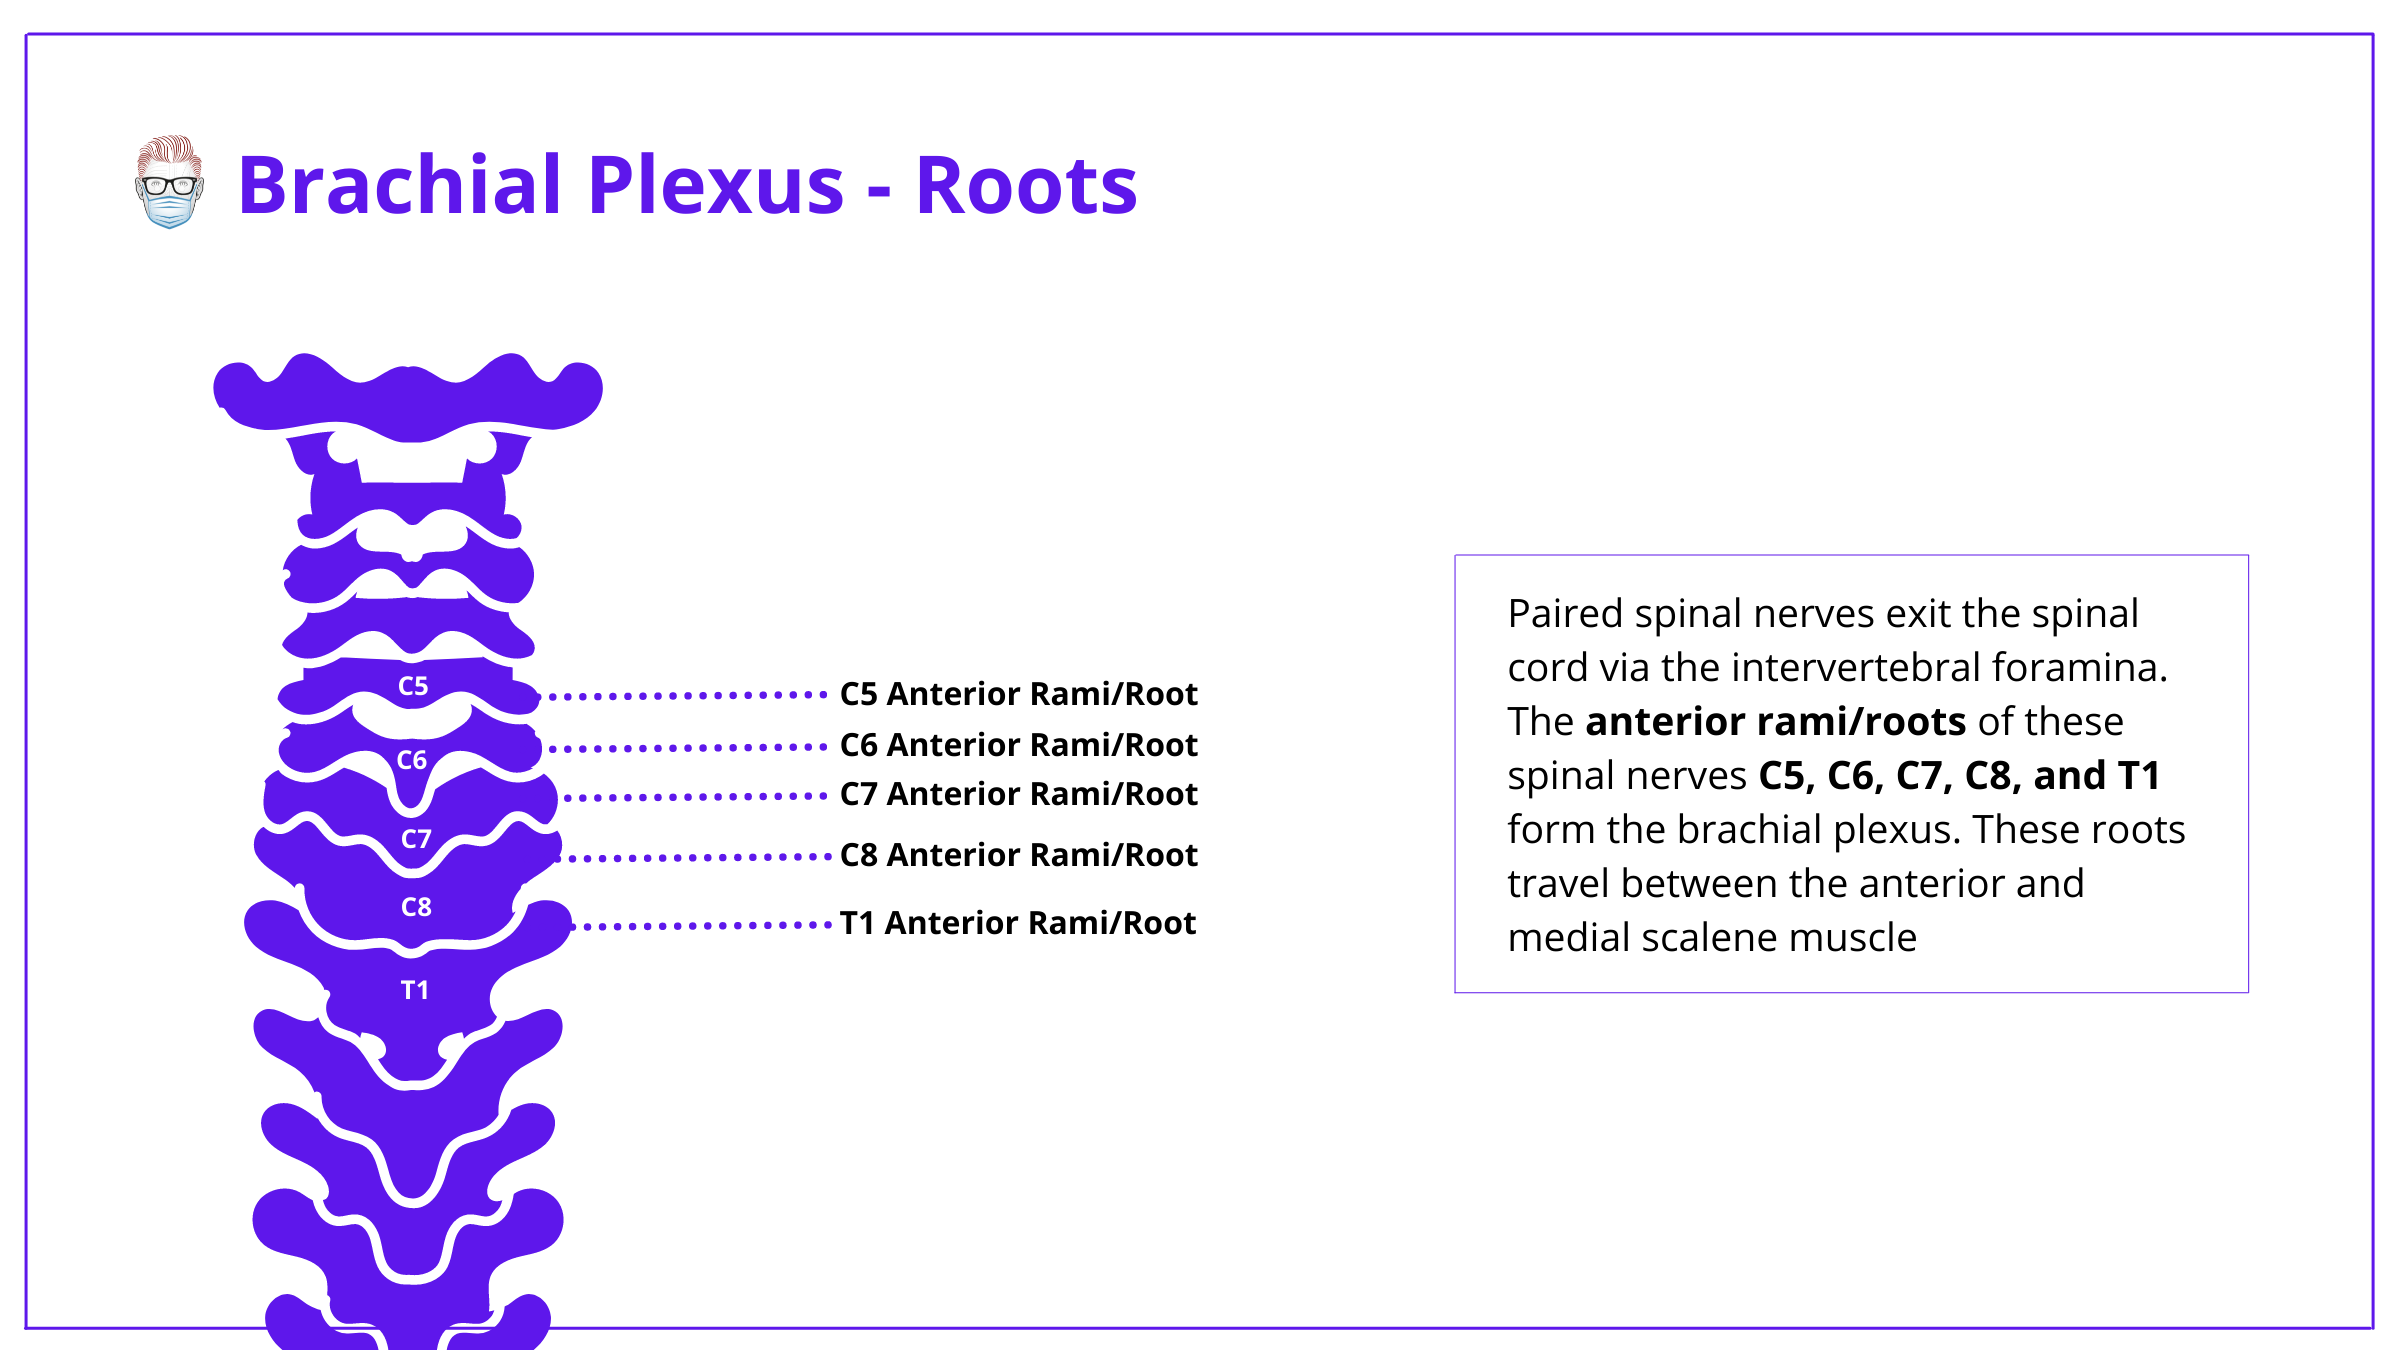 brachial plexus, anatomy, brachial plexus anatomy, roots, trunks, divisions, cords, branches